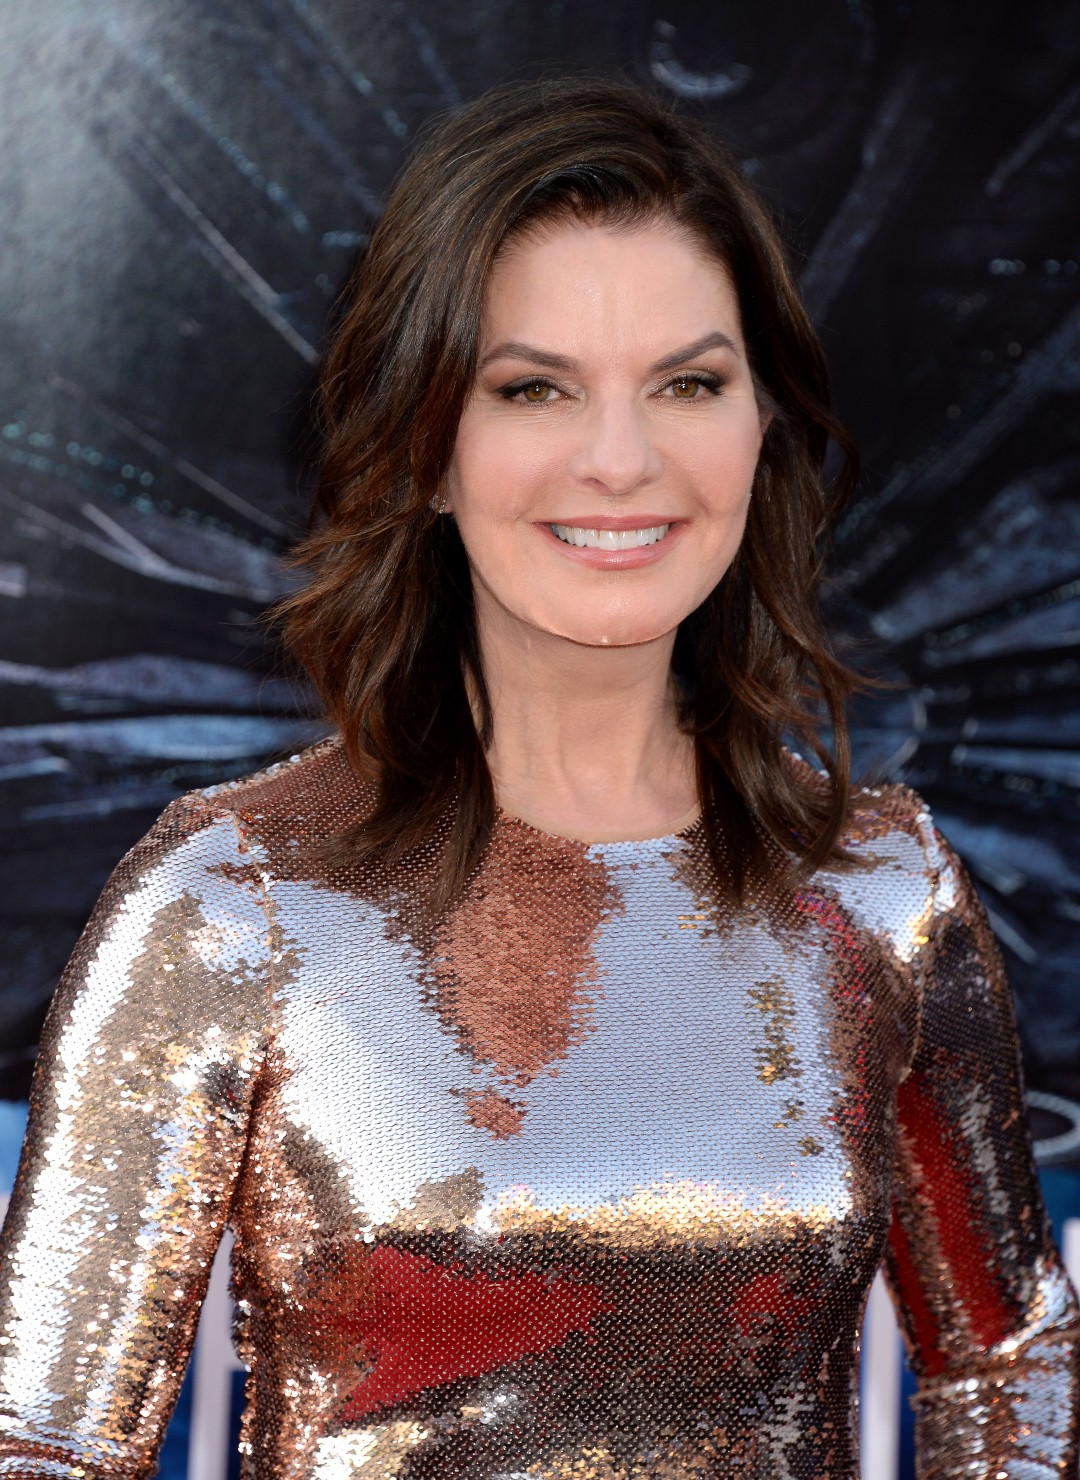 sela-ward-premiere-of-20th-century-foxs-independence-day-resurgence-tcl-chinese-theatre-hollywood-62016-2 (Large).jpg